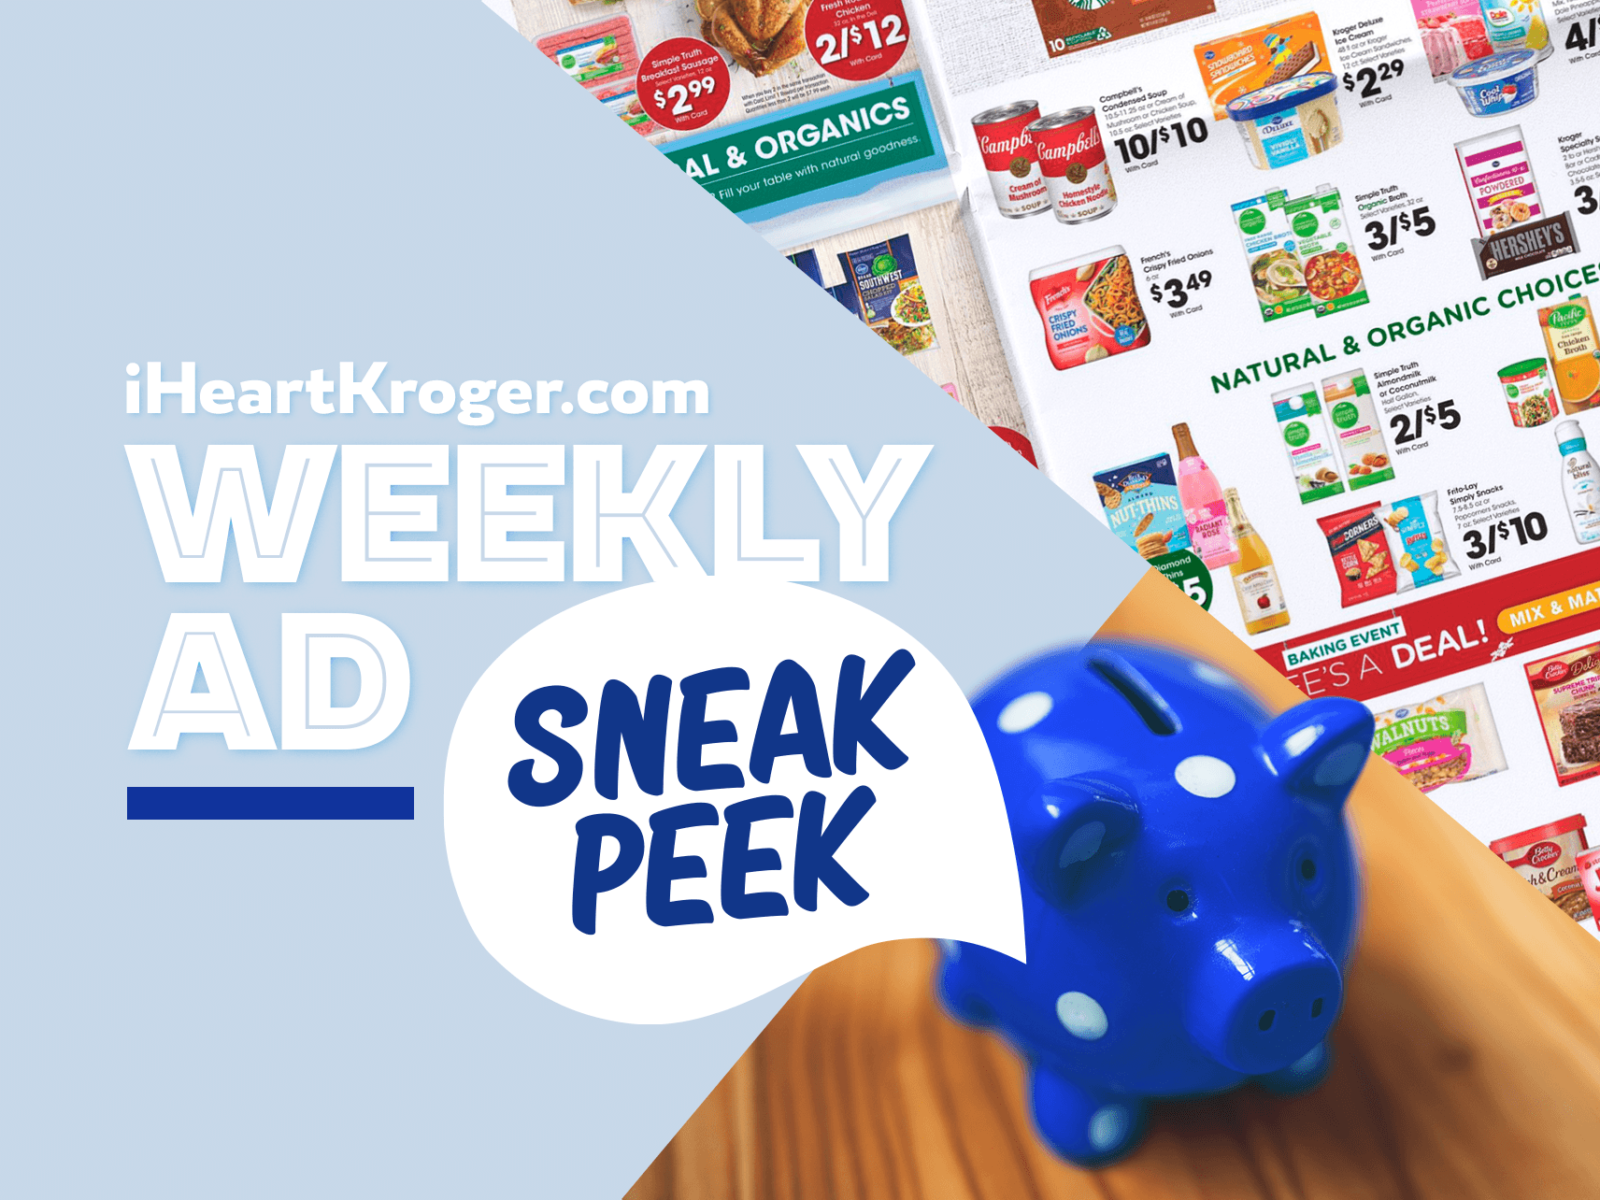 Kroger Ad & Coupons Week Of 5/24 to 5/30 – Mega Sale Continues